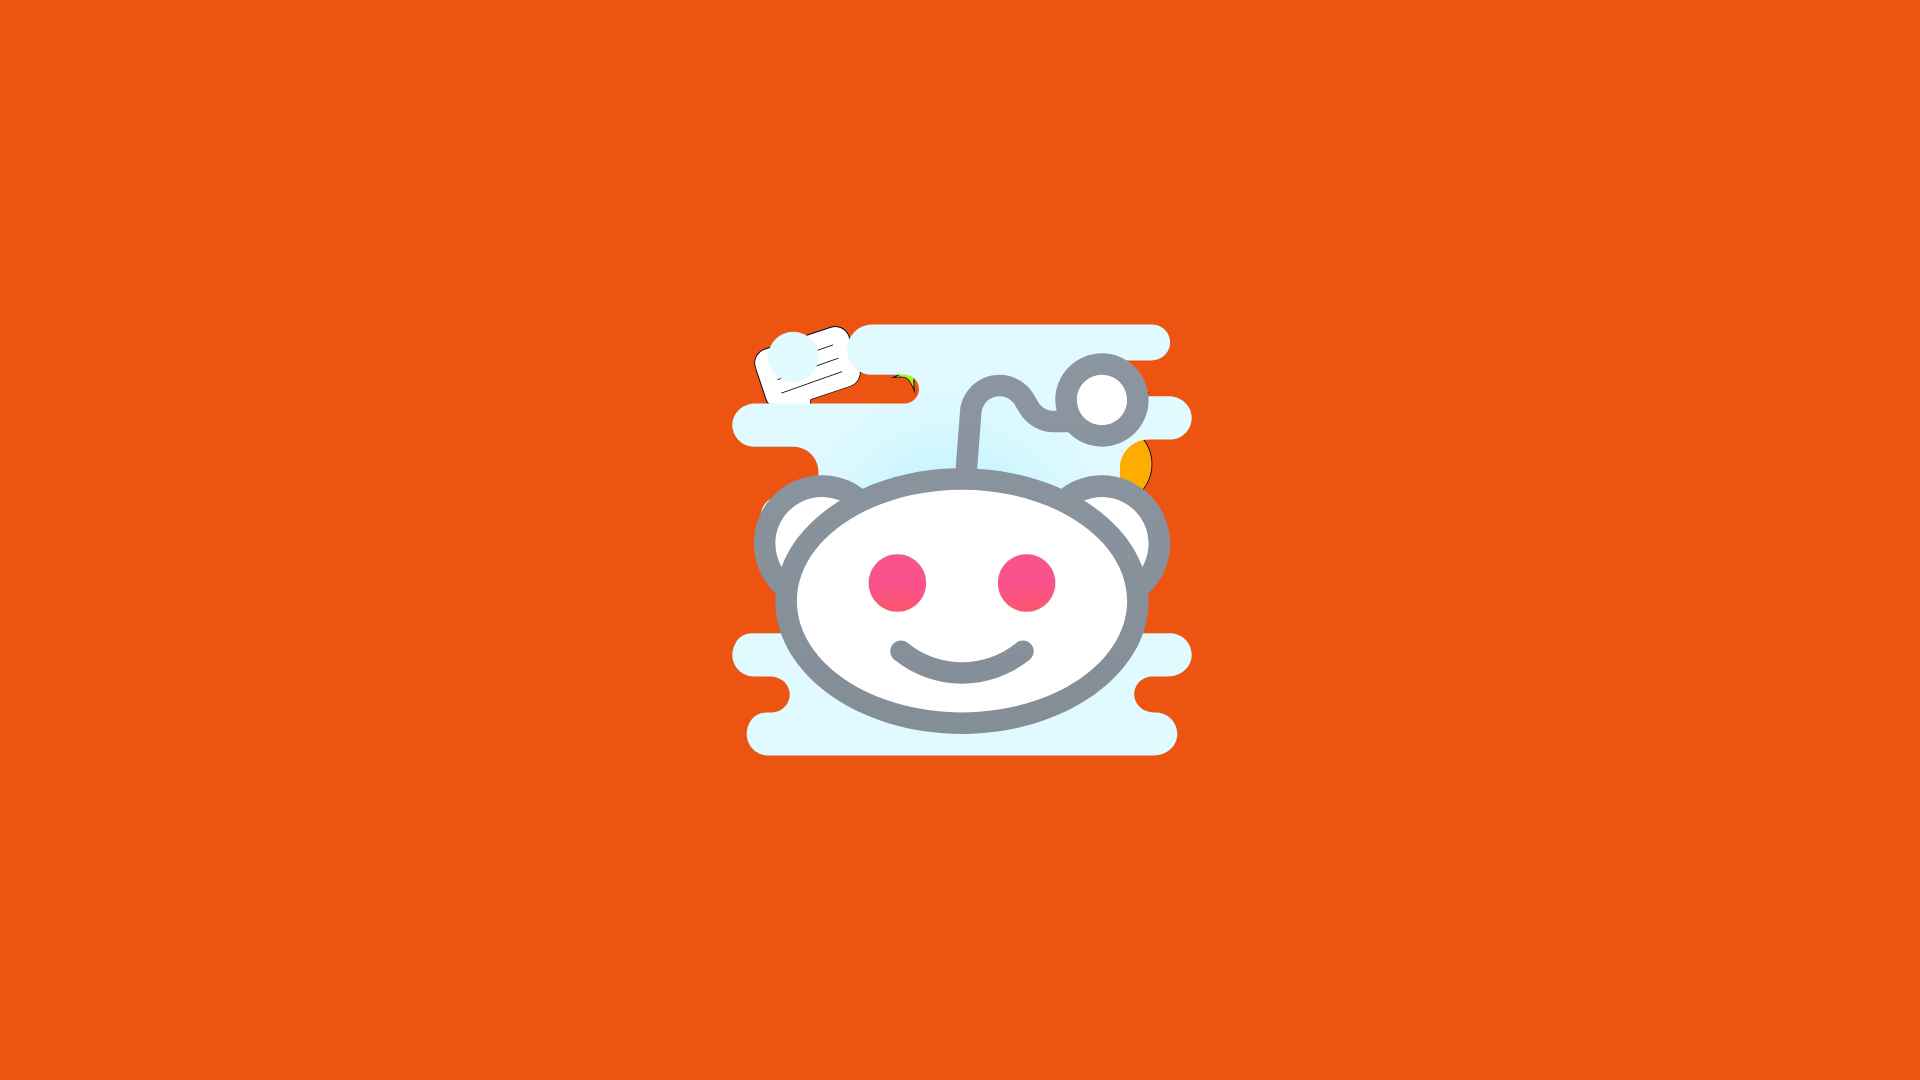 How can users search for specific topics or keywords on Reddit?